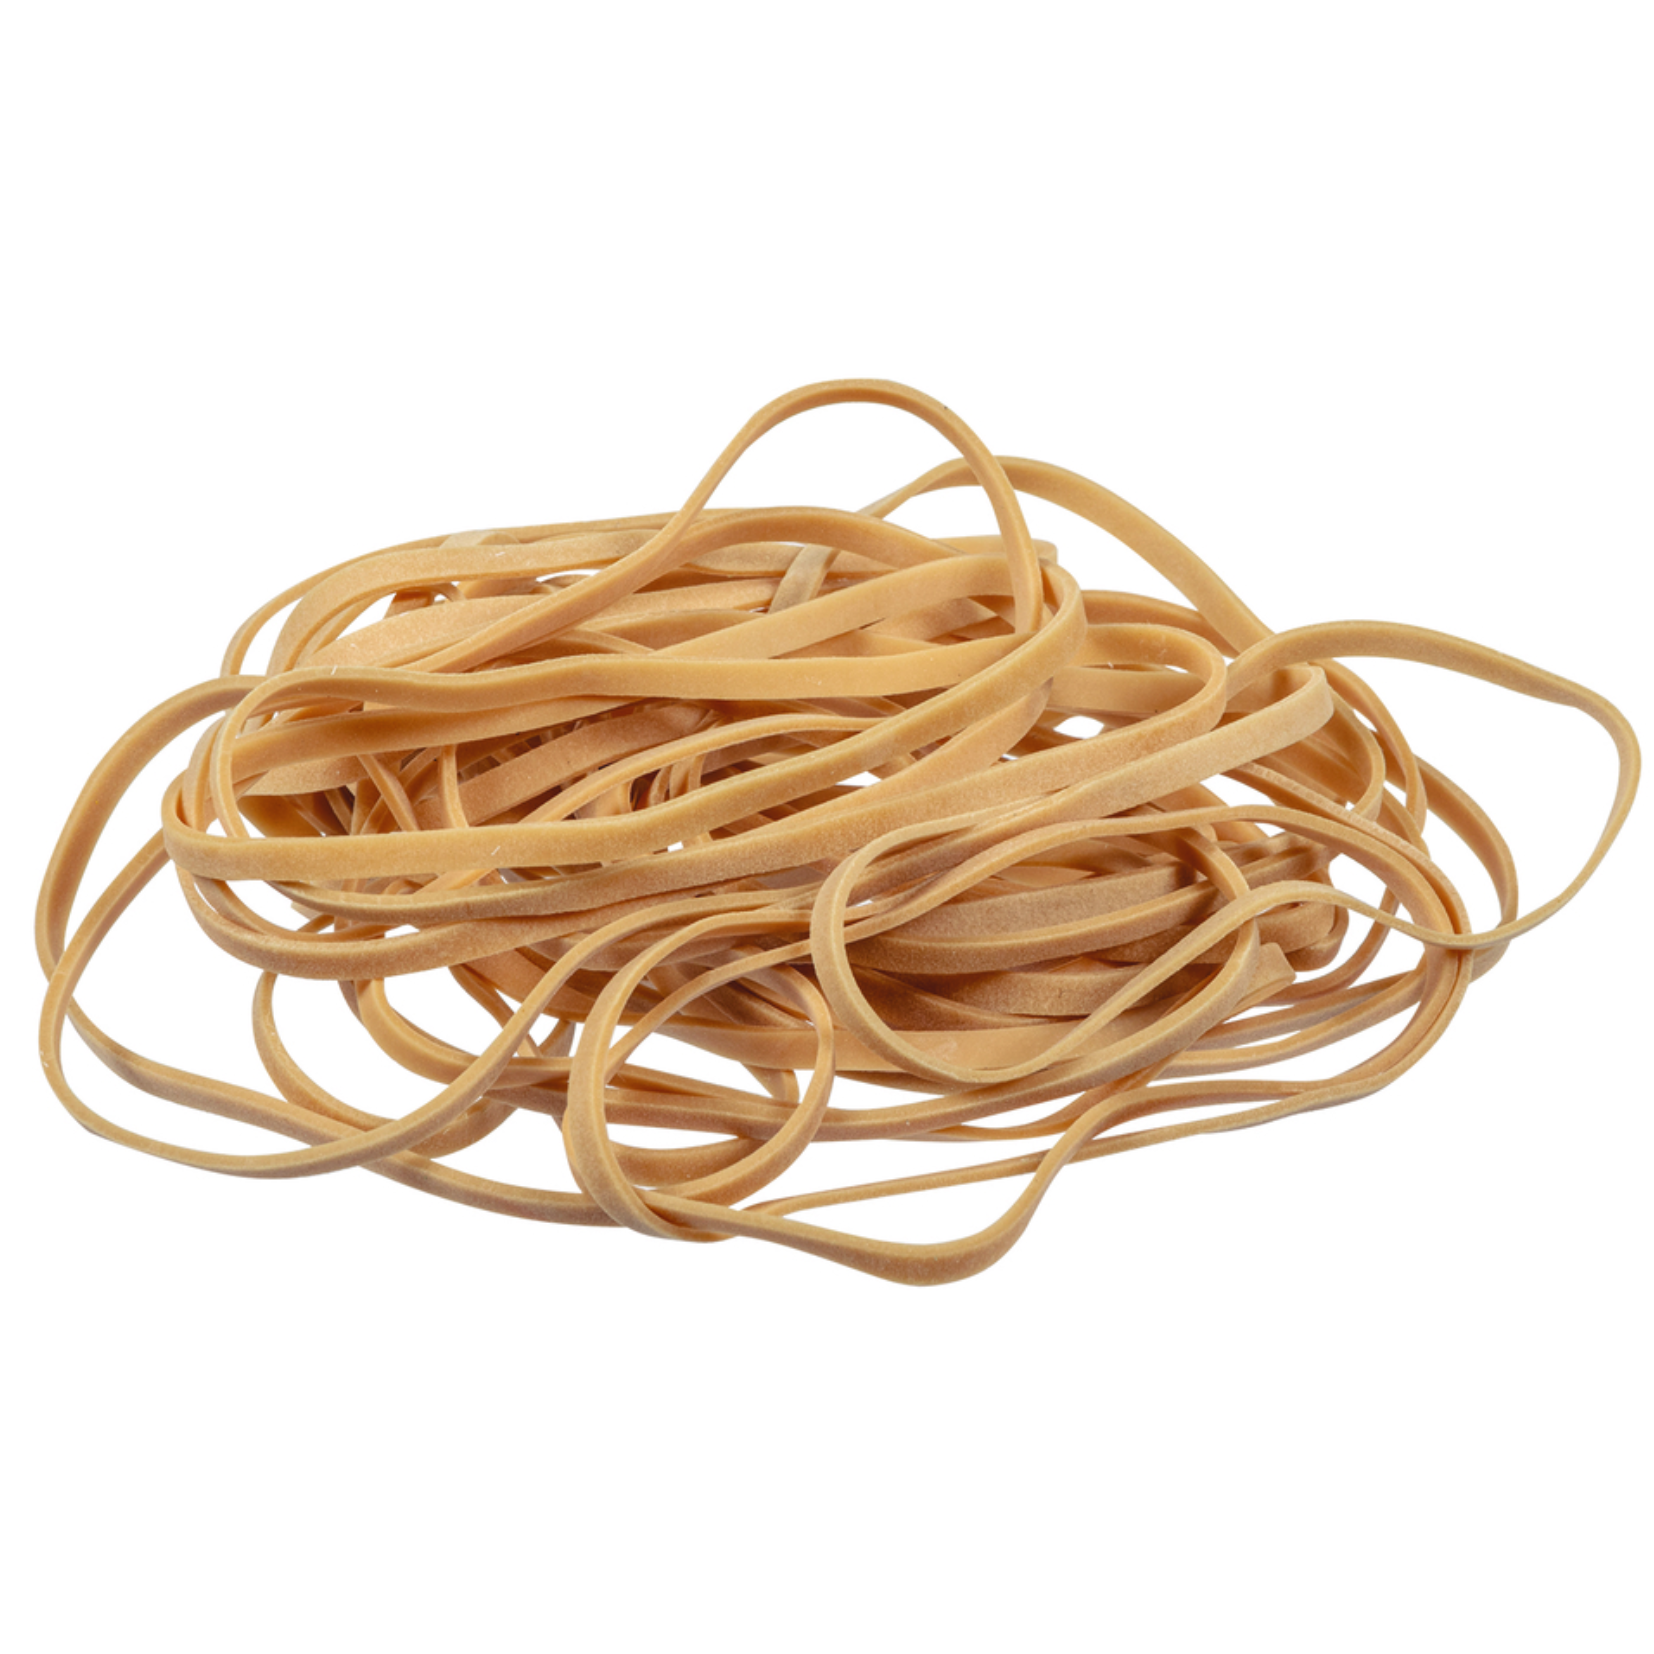 Latex Free Rubber Bands #33  1/4lb Thickness